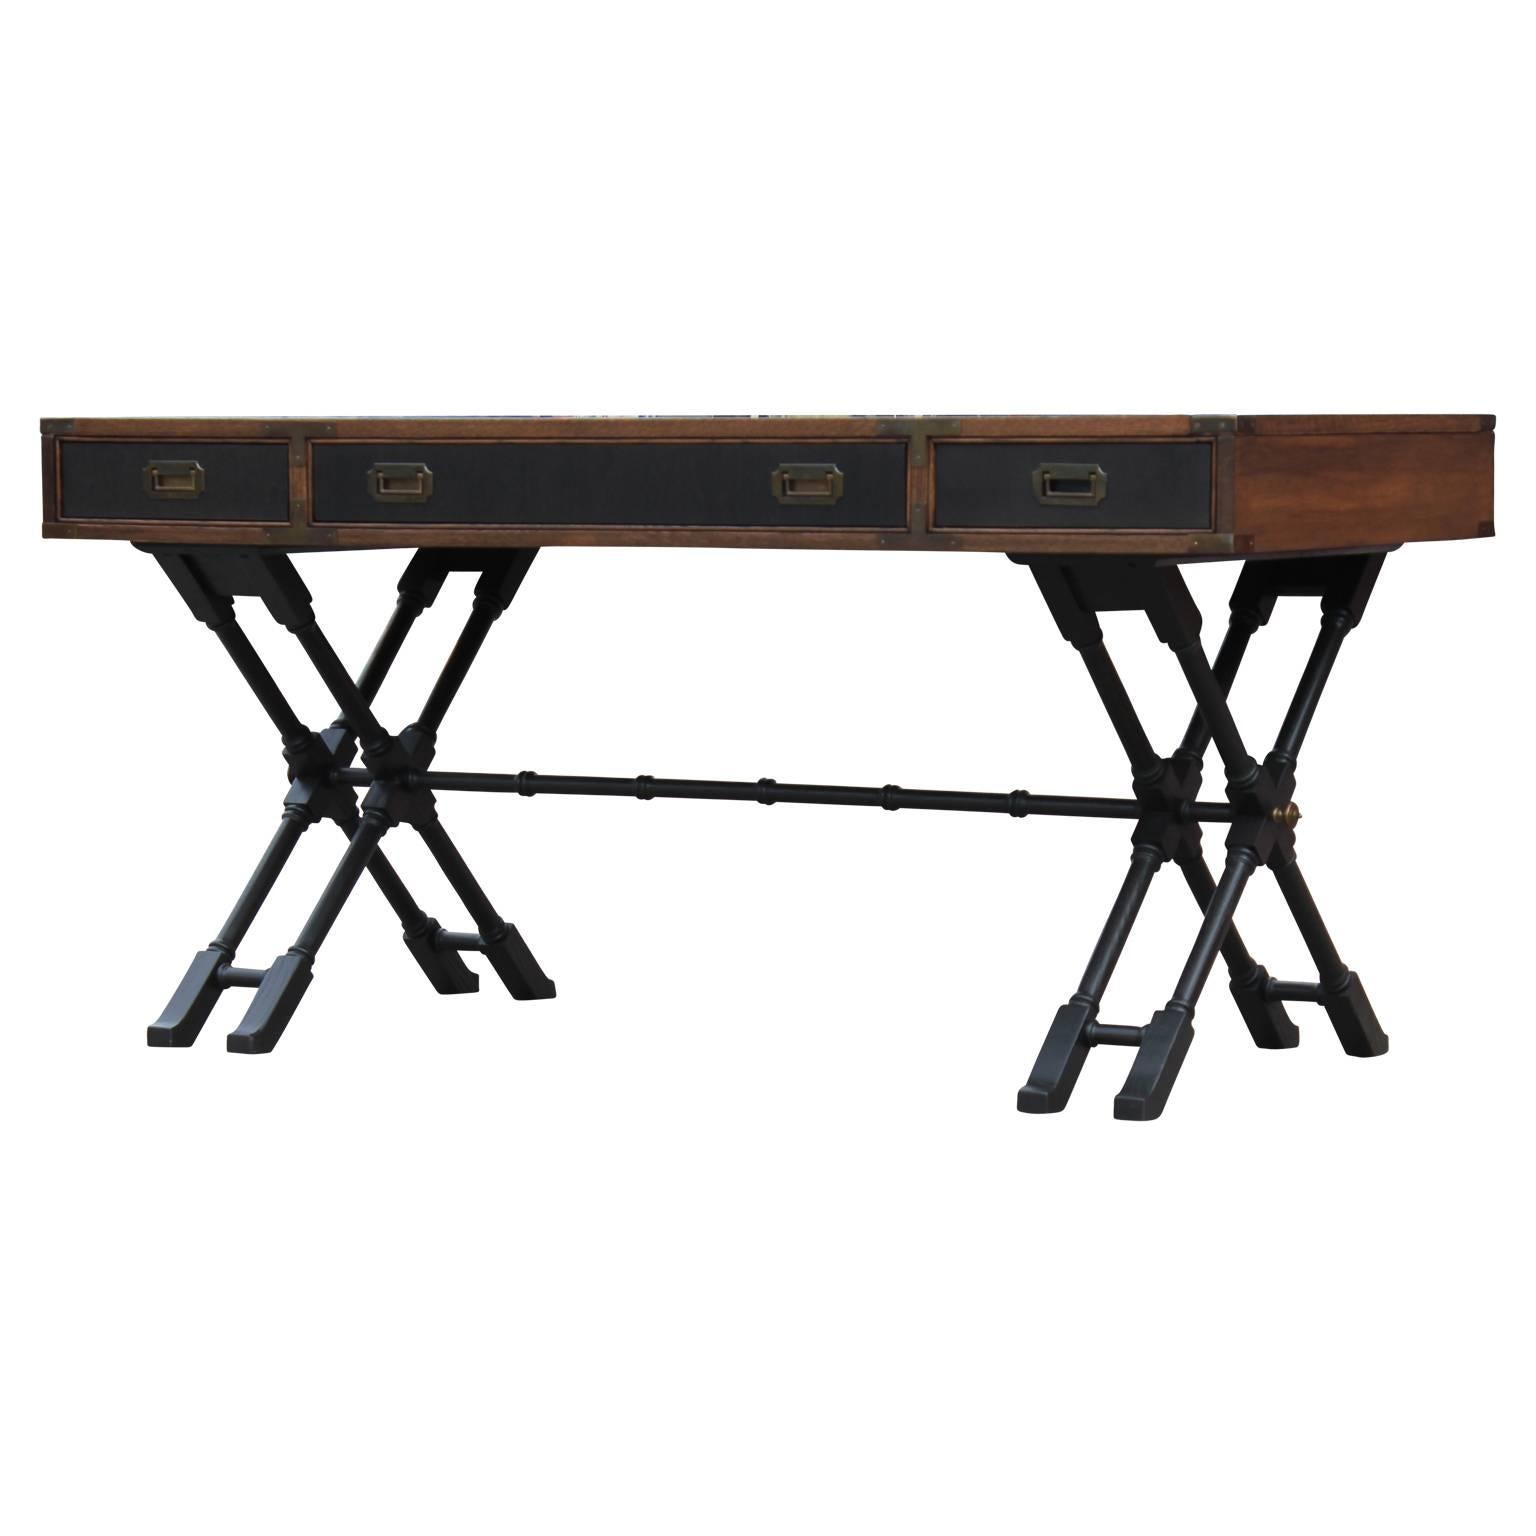 Mid-20th Century Modern Campaign Style Faux Bamboo Desk with Leather Inserts & Brass by Brandt